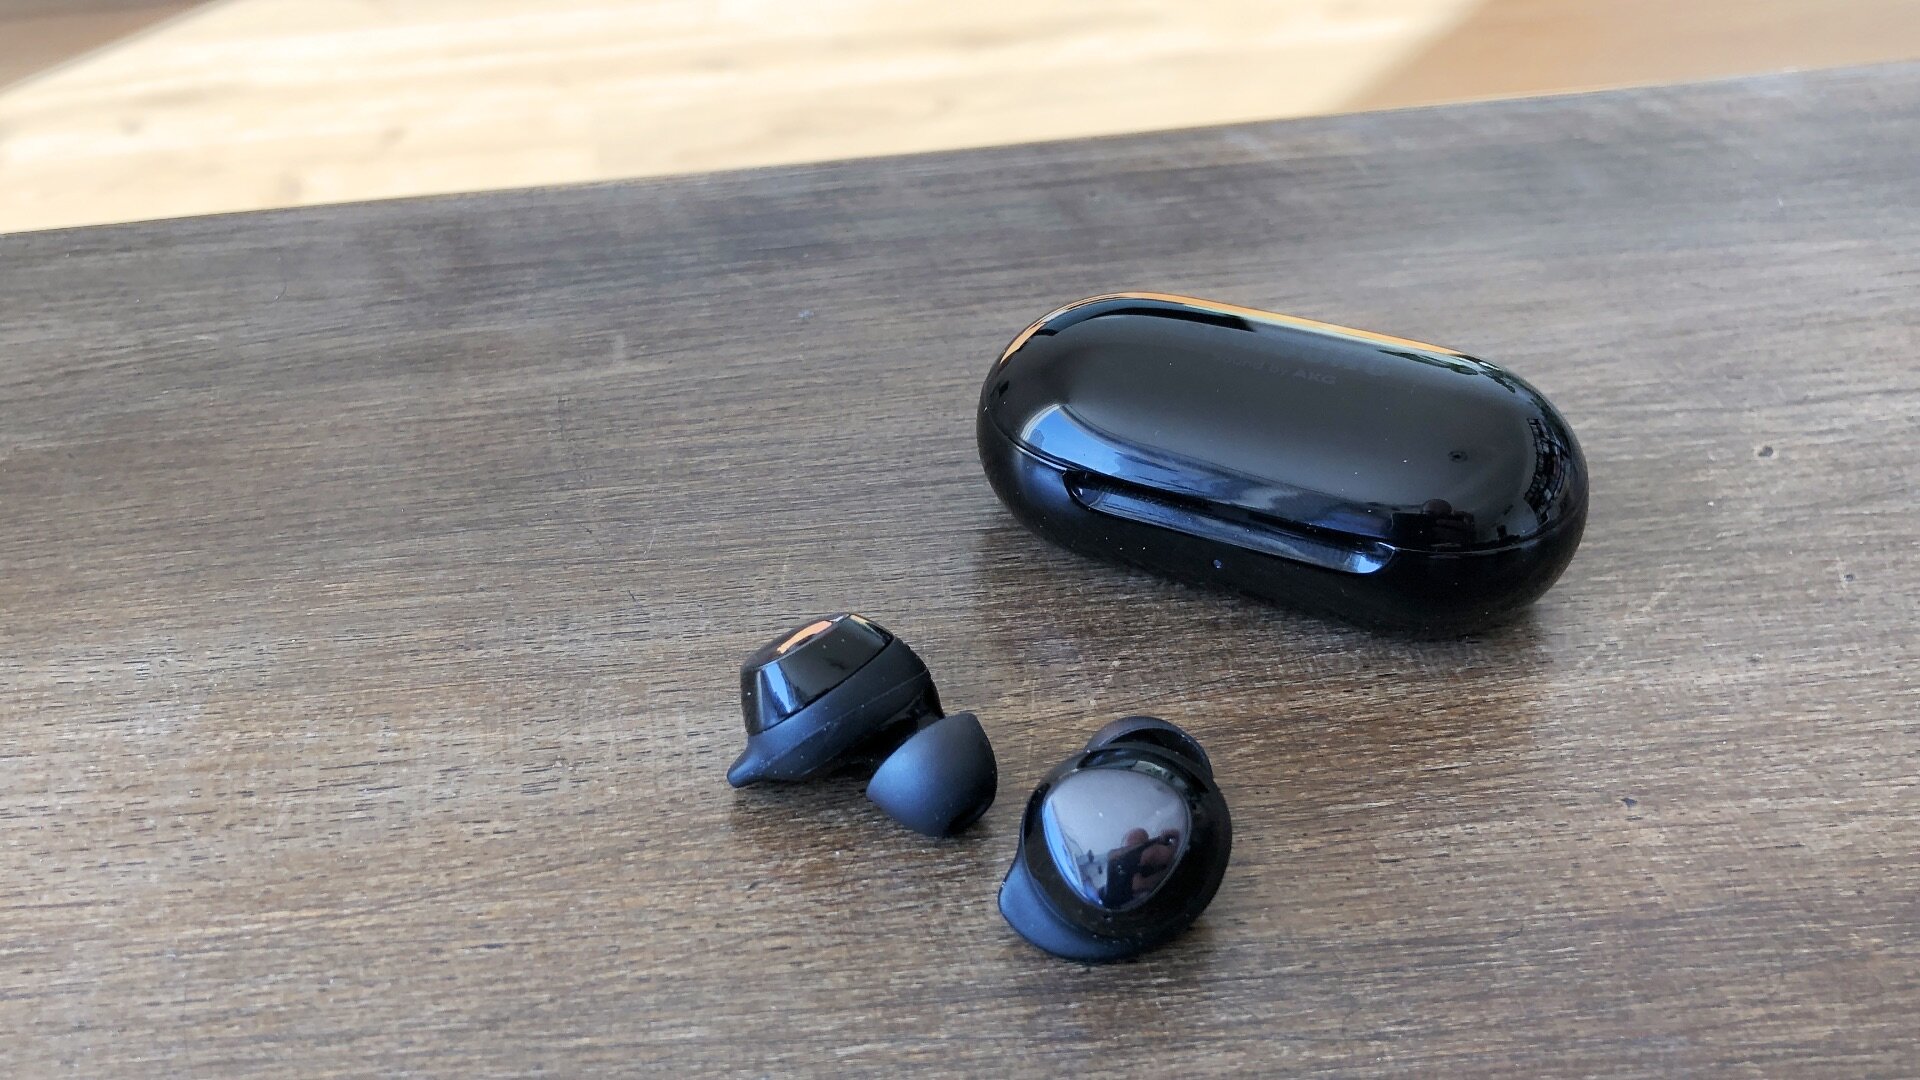 Samsung Galaxy Buds Plus Review: Close to Perfection